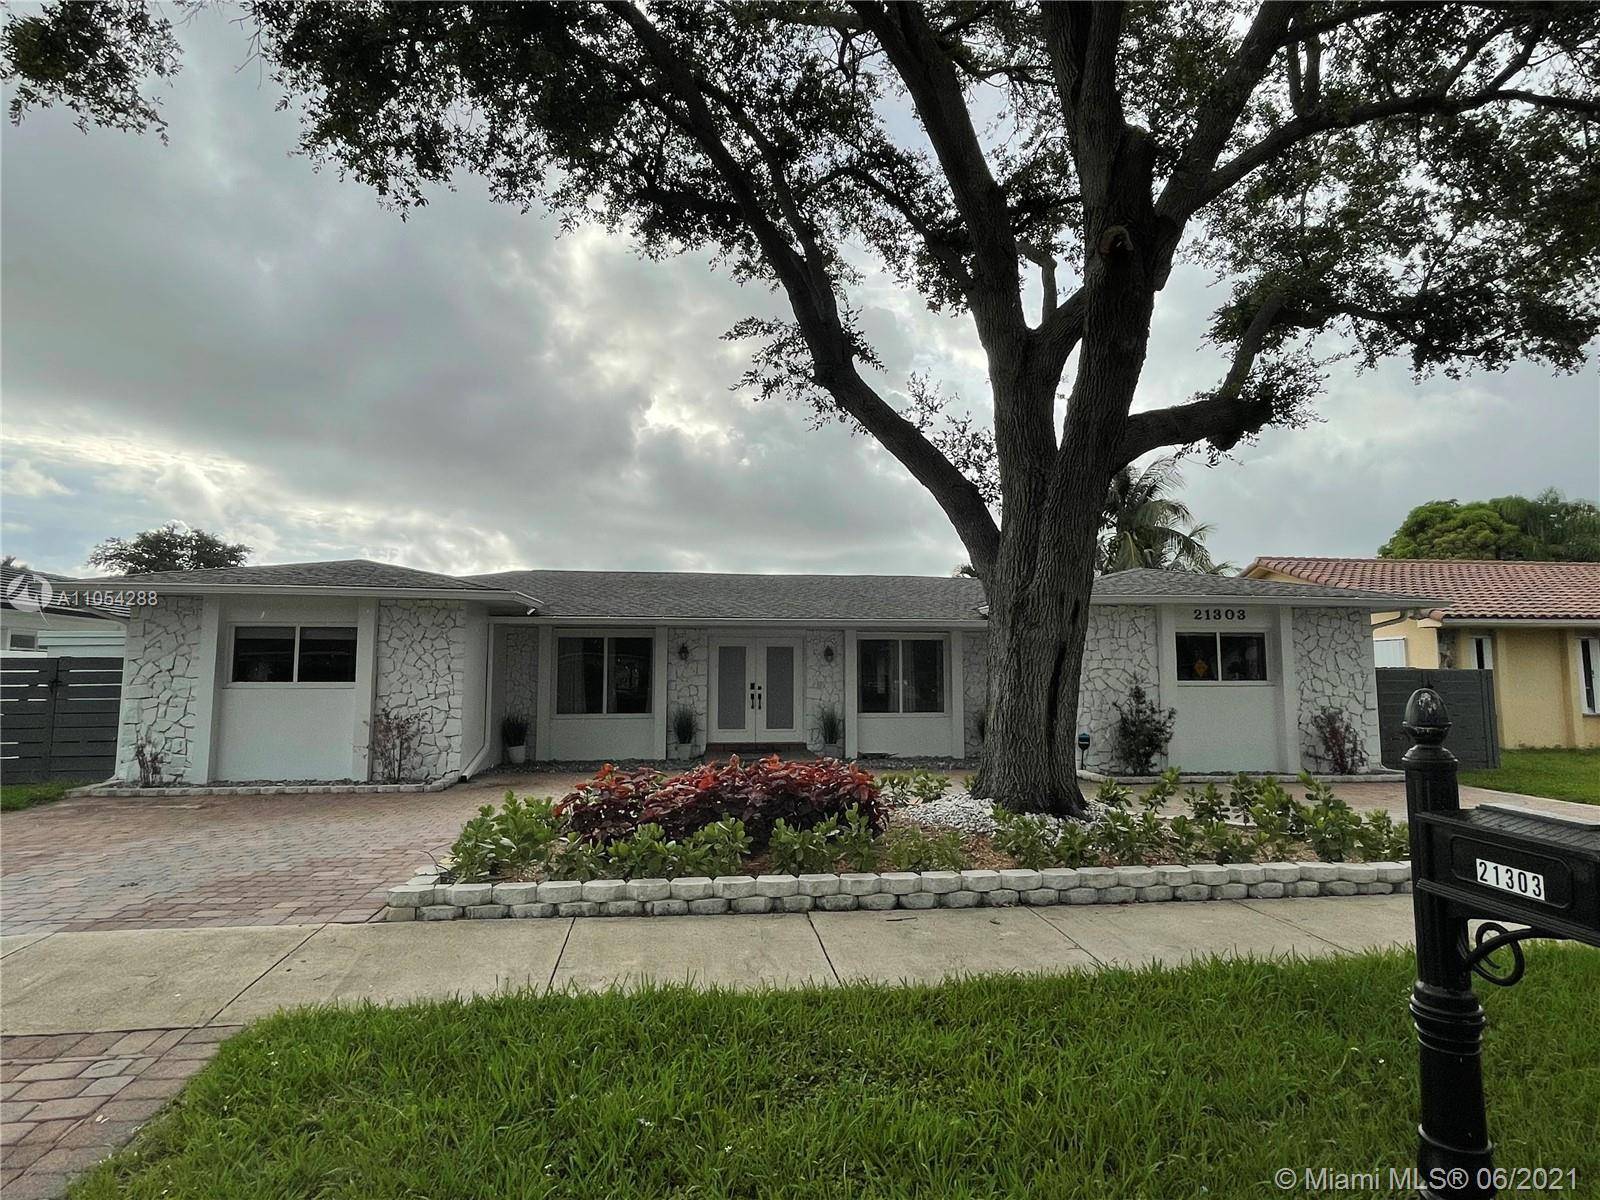 TOTALLY RENOVATED MODERN HOME in Highland Lakes gated neighborhood.